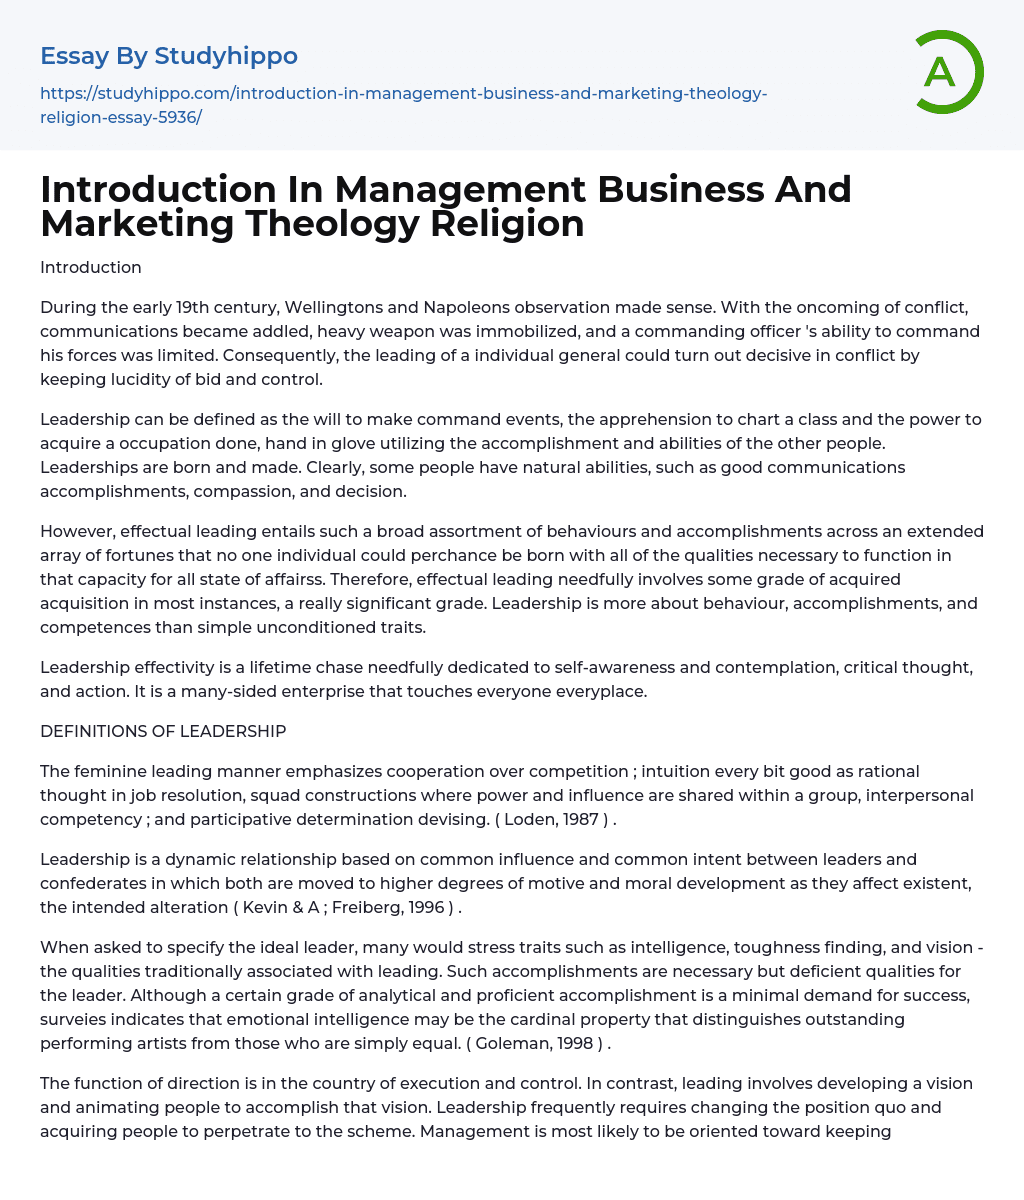 Introduction In Management Business And Marketing Theology Religion